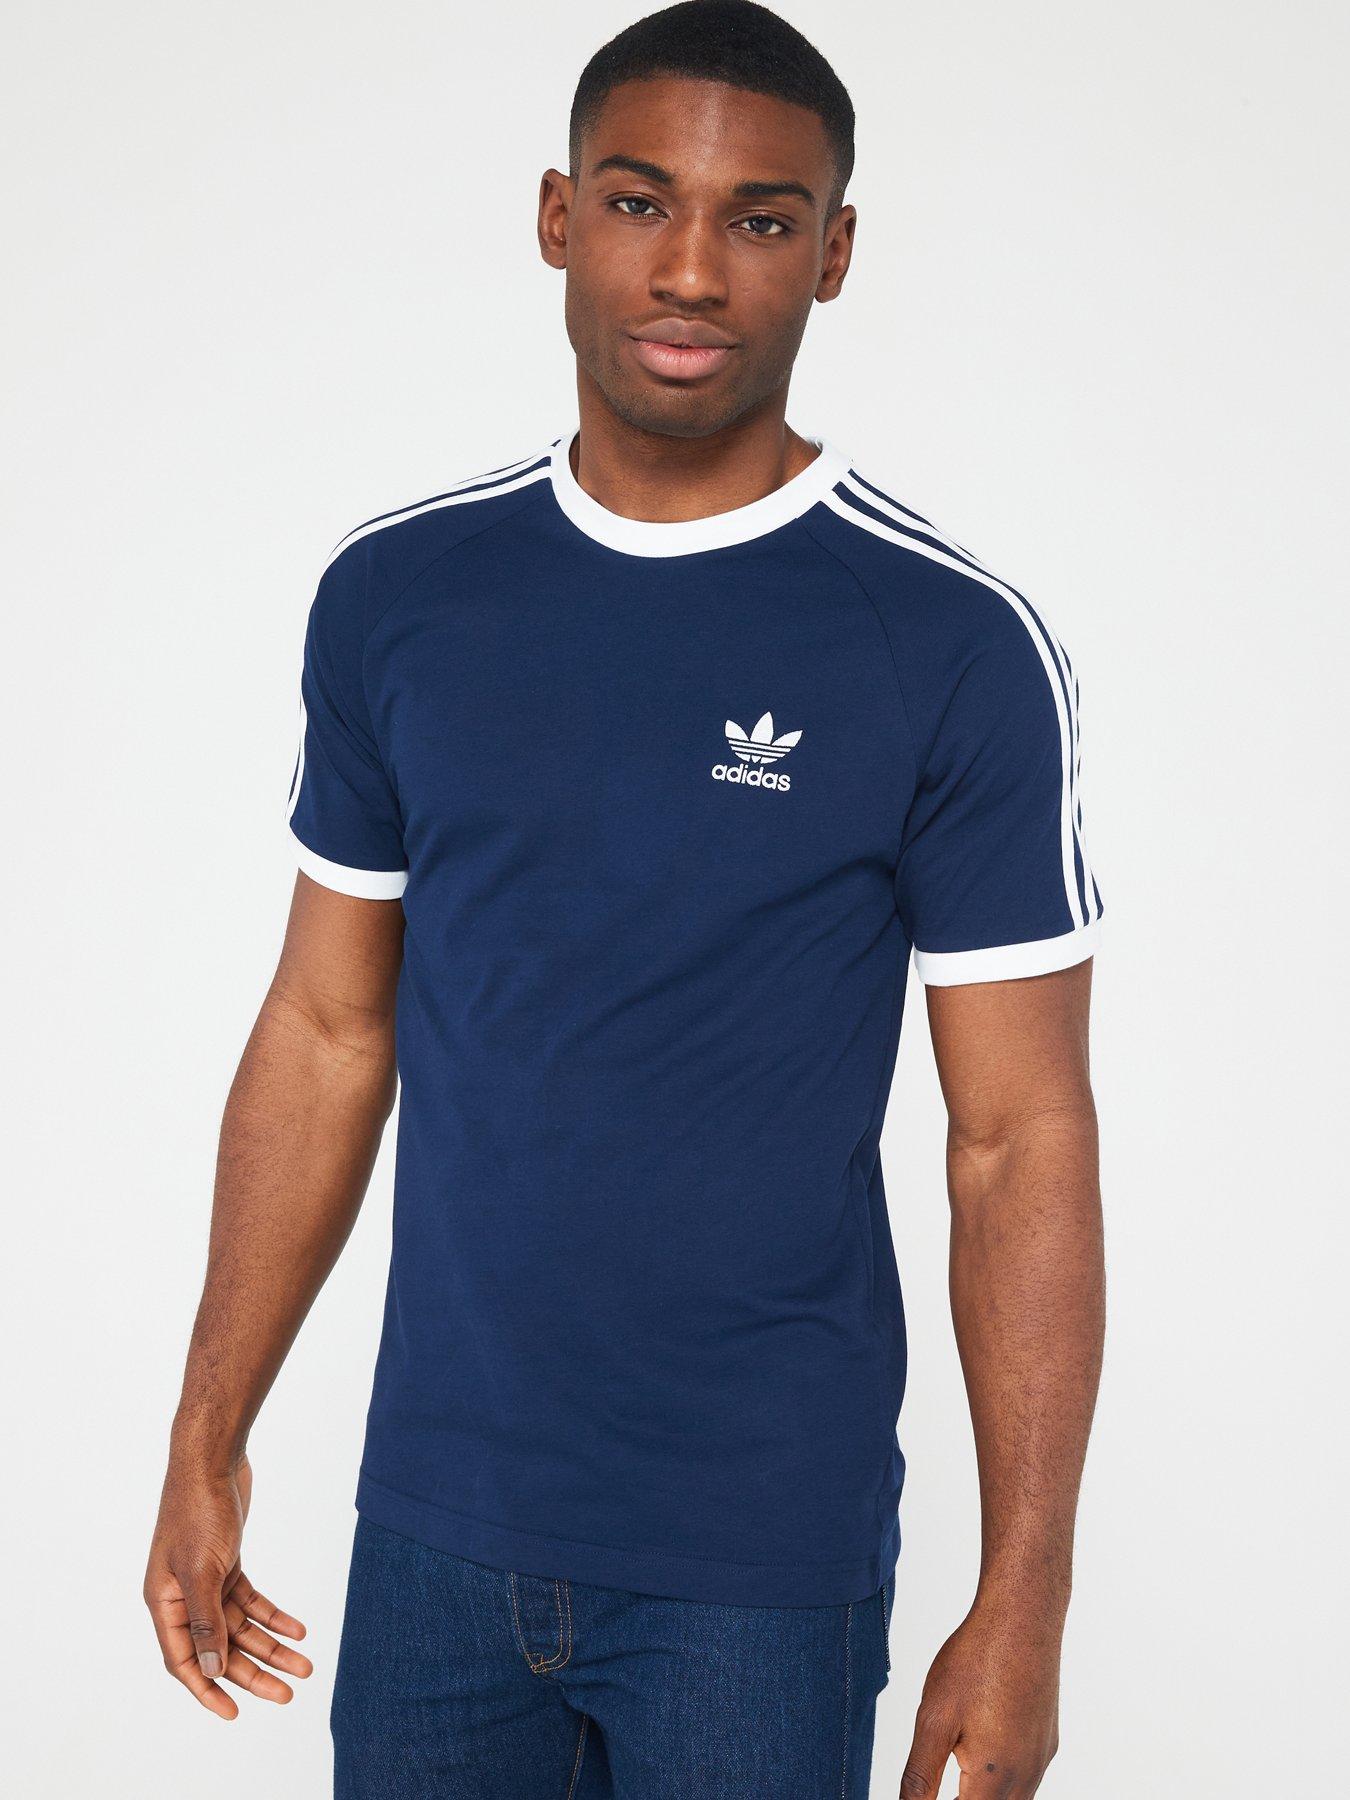 All Black Friday Deals, Main Collection, Adidas, T-shirts & polos, Men